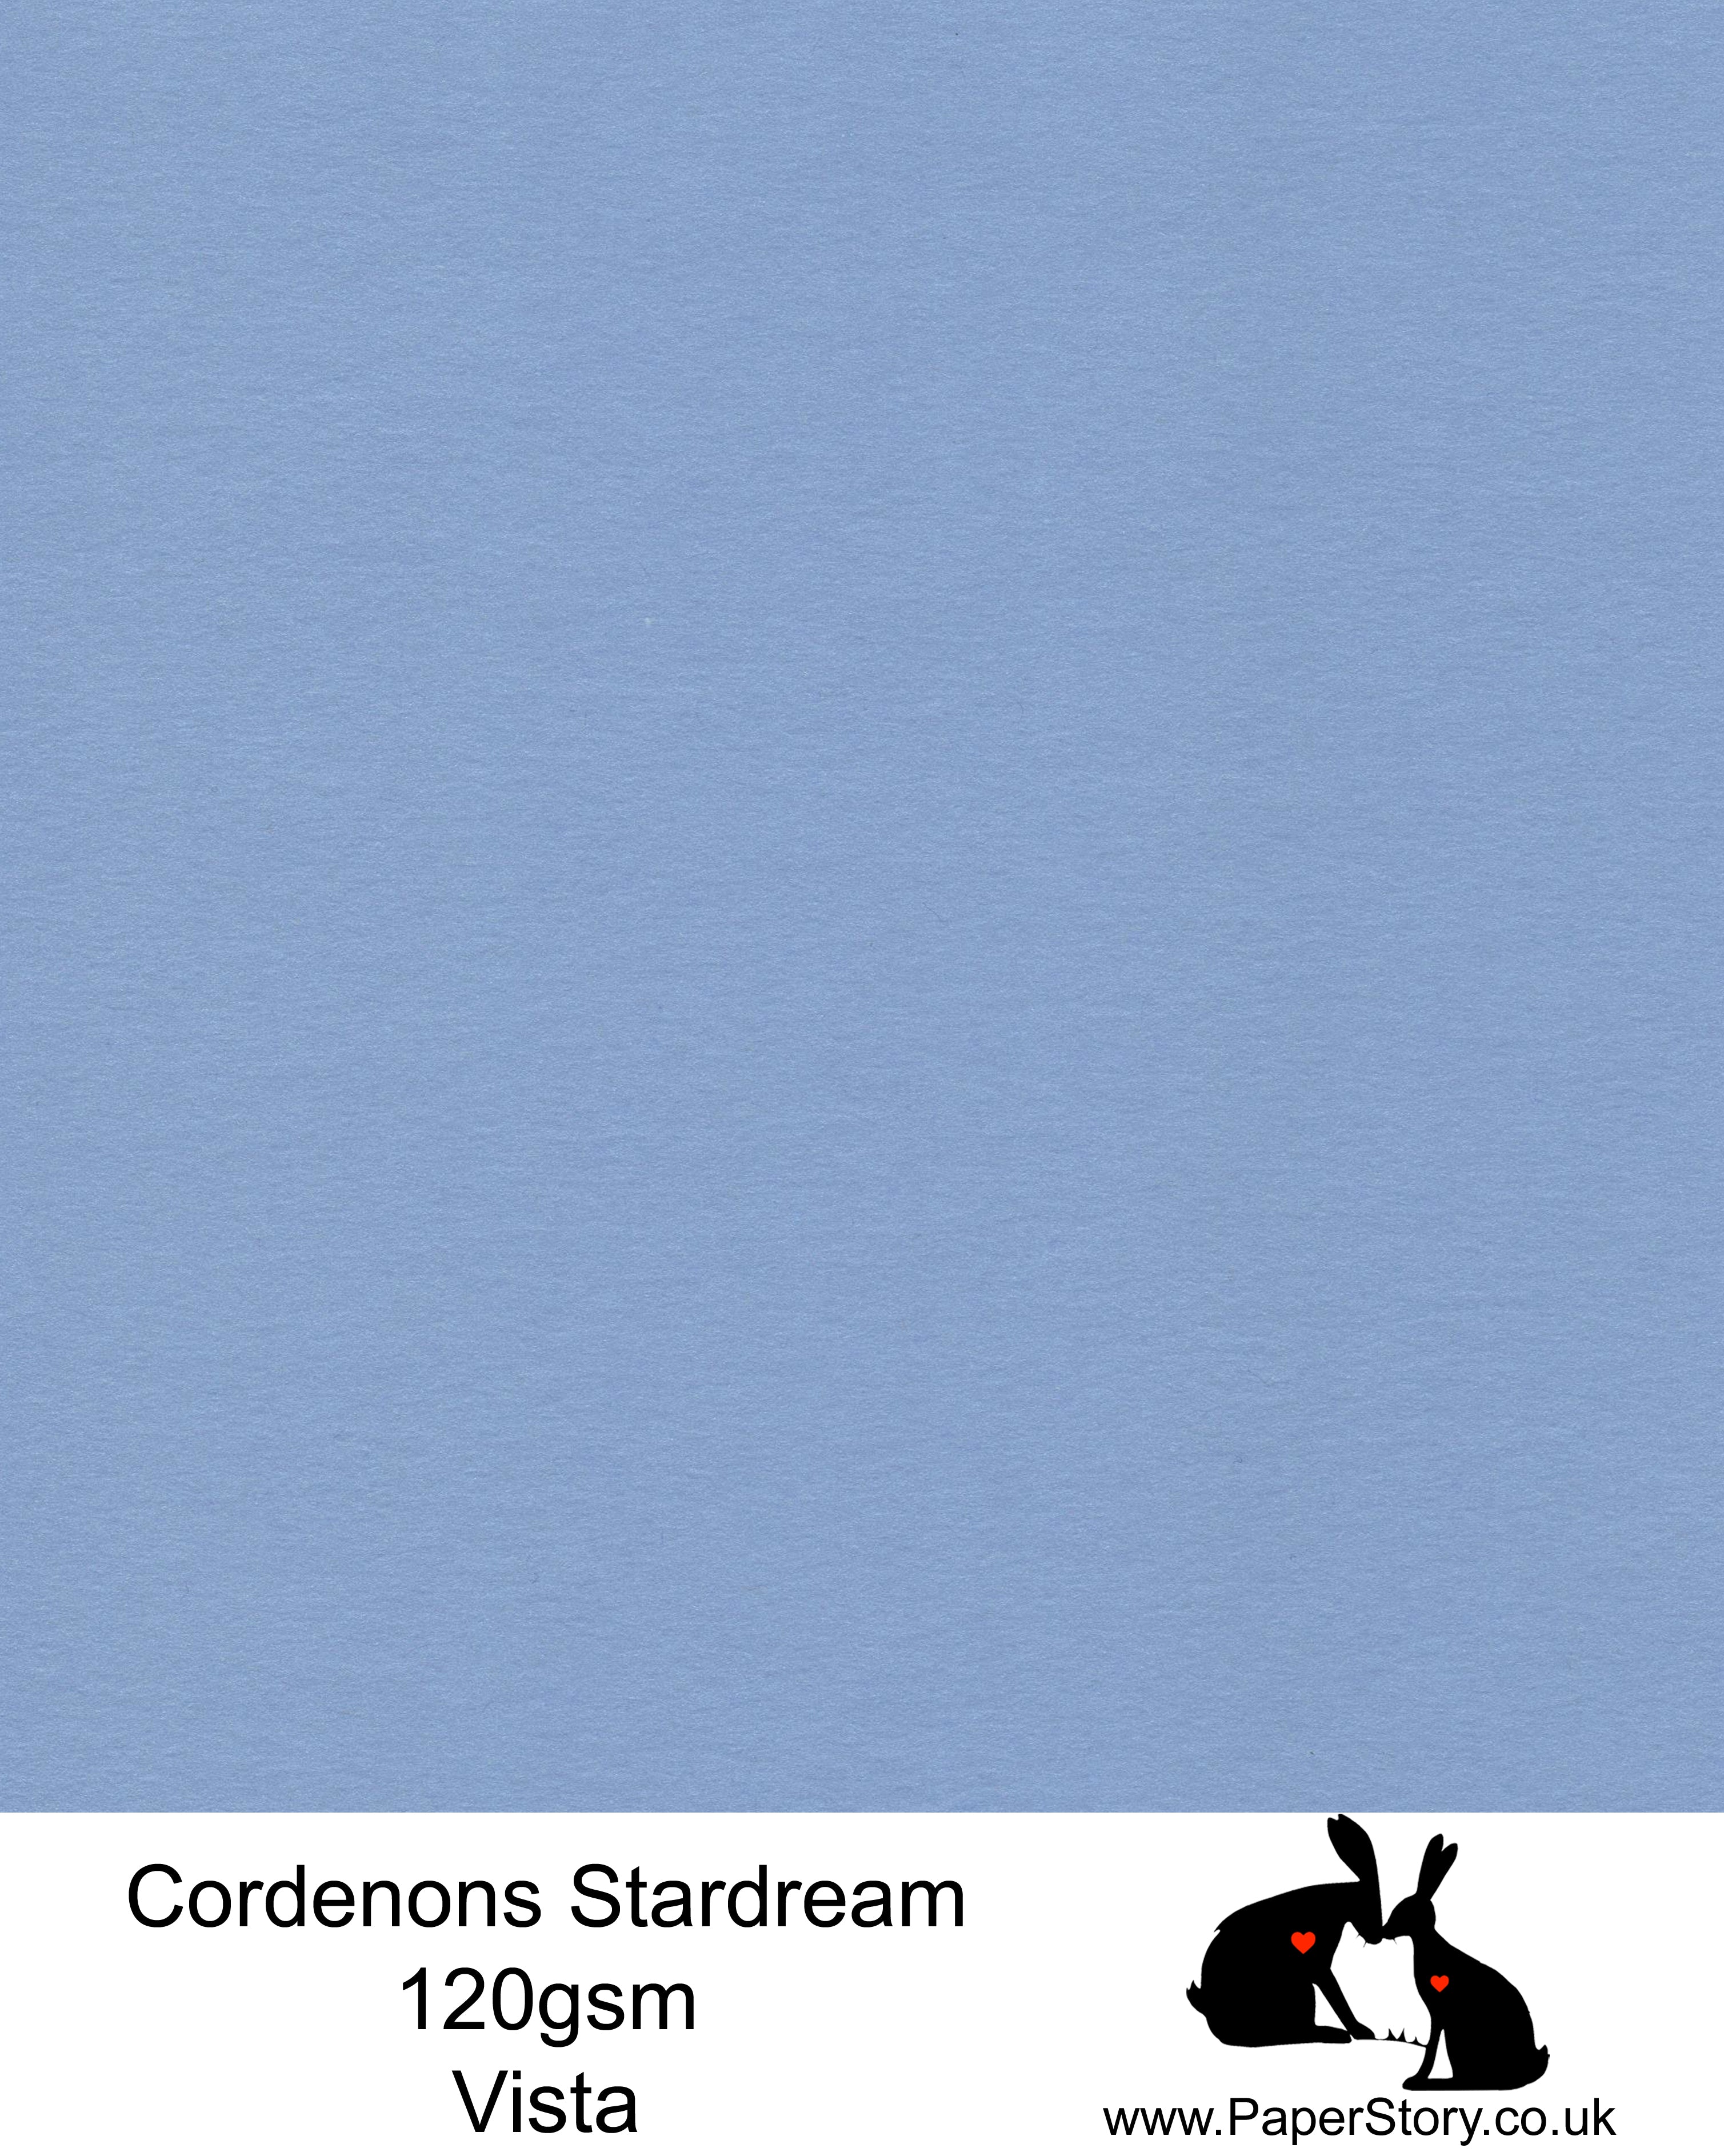 A4 Stardream 120gsm paper for Papercutting, craft, flower making  and wedding stationery. Dreamy soft blue. Stardream is a luxury Italian paper from Italy, it is a double sided quality Pearlescent paper with a matching colour core. FSC Certified, acid free, archival and PH Neutral